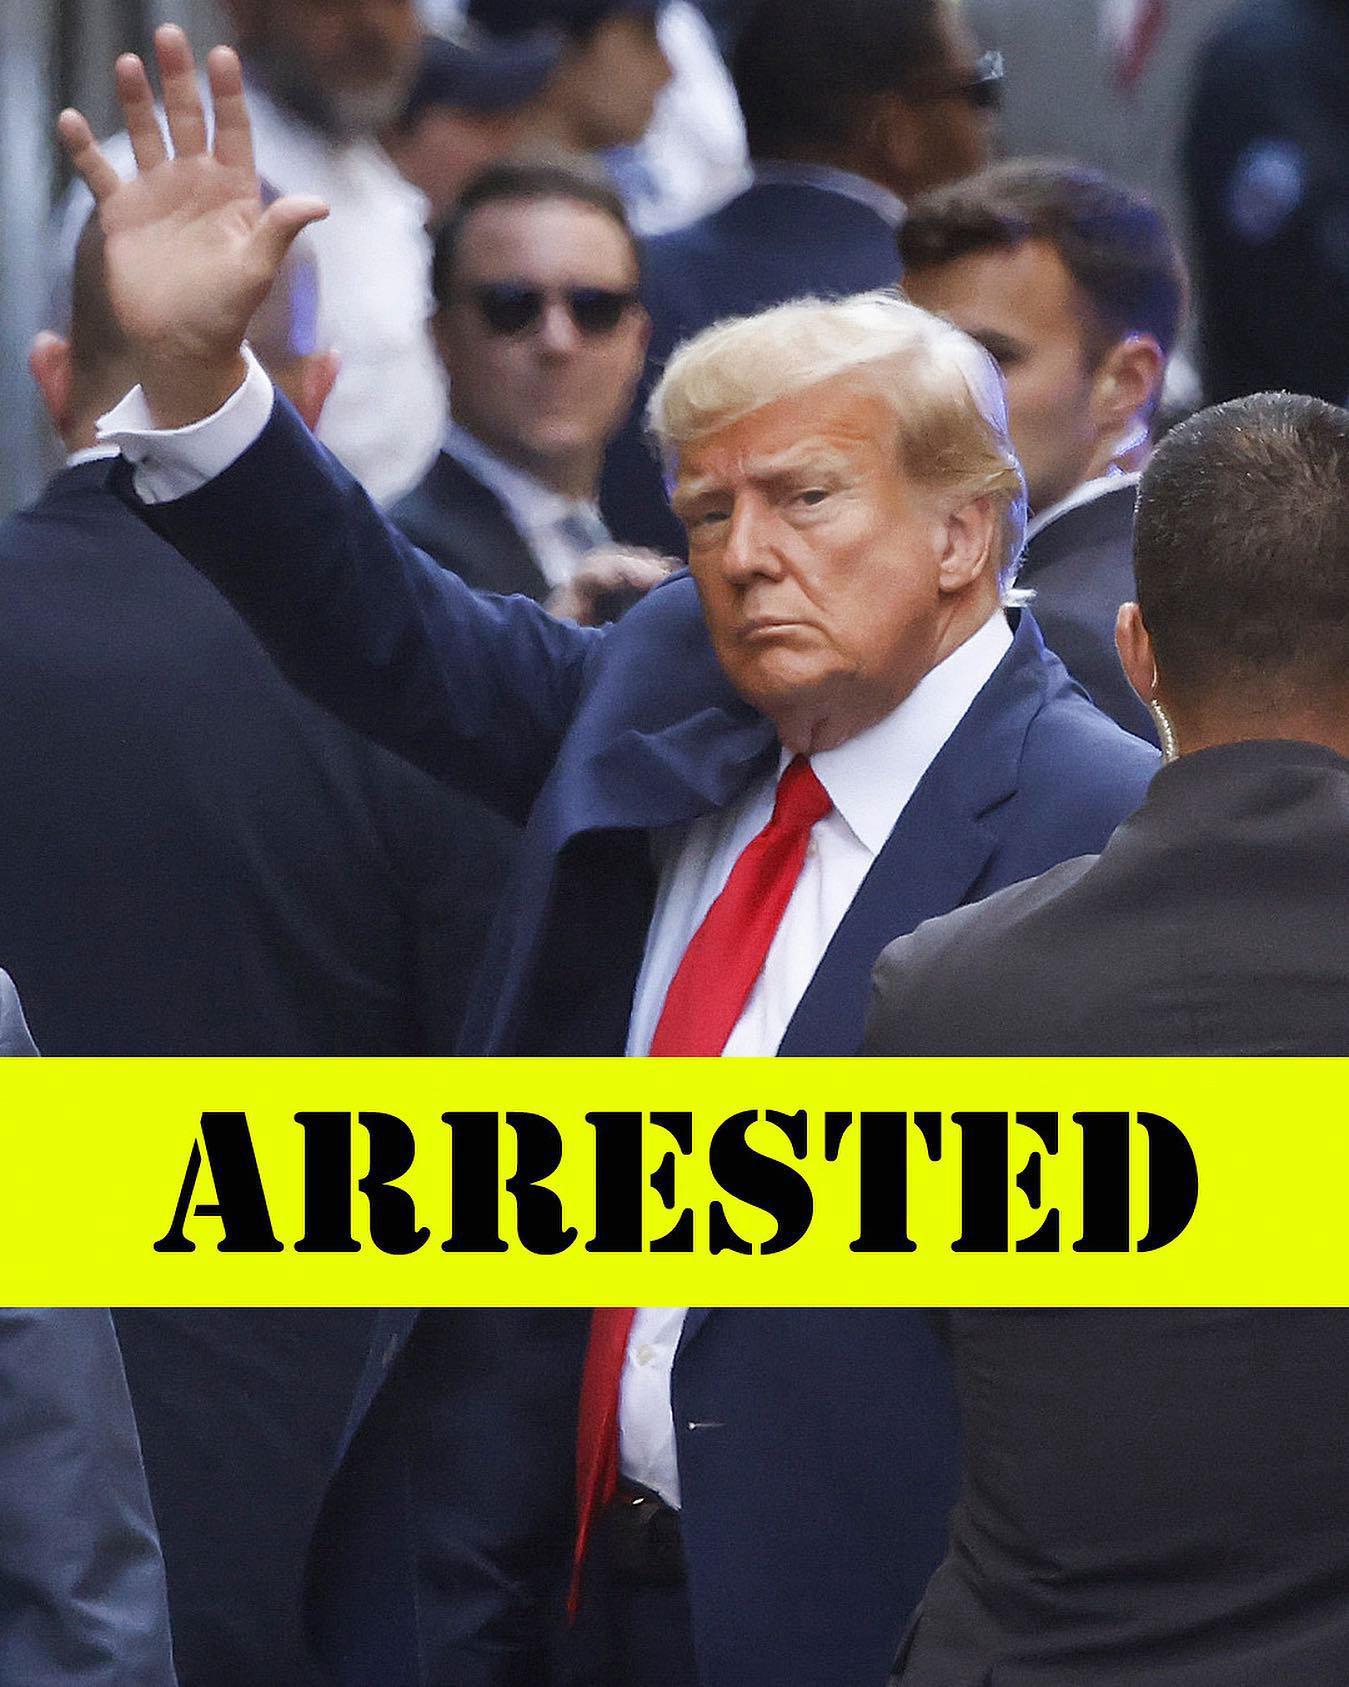 Donald Trump is officially under arrest, making him the first former president to be charged with a